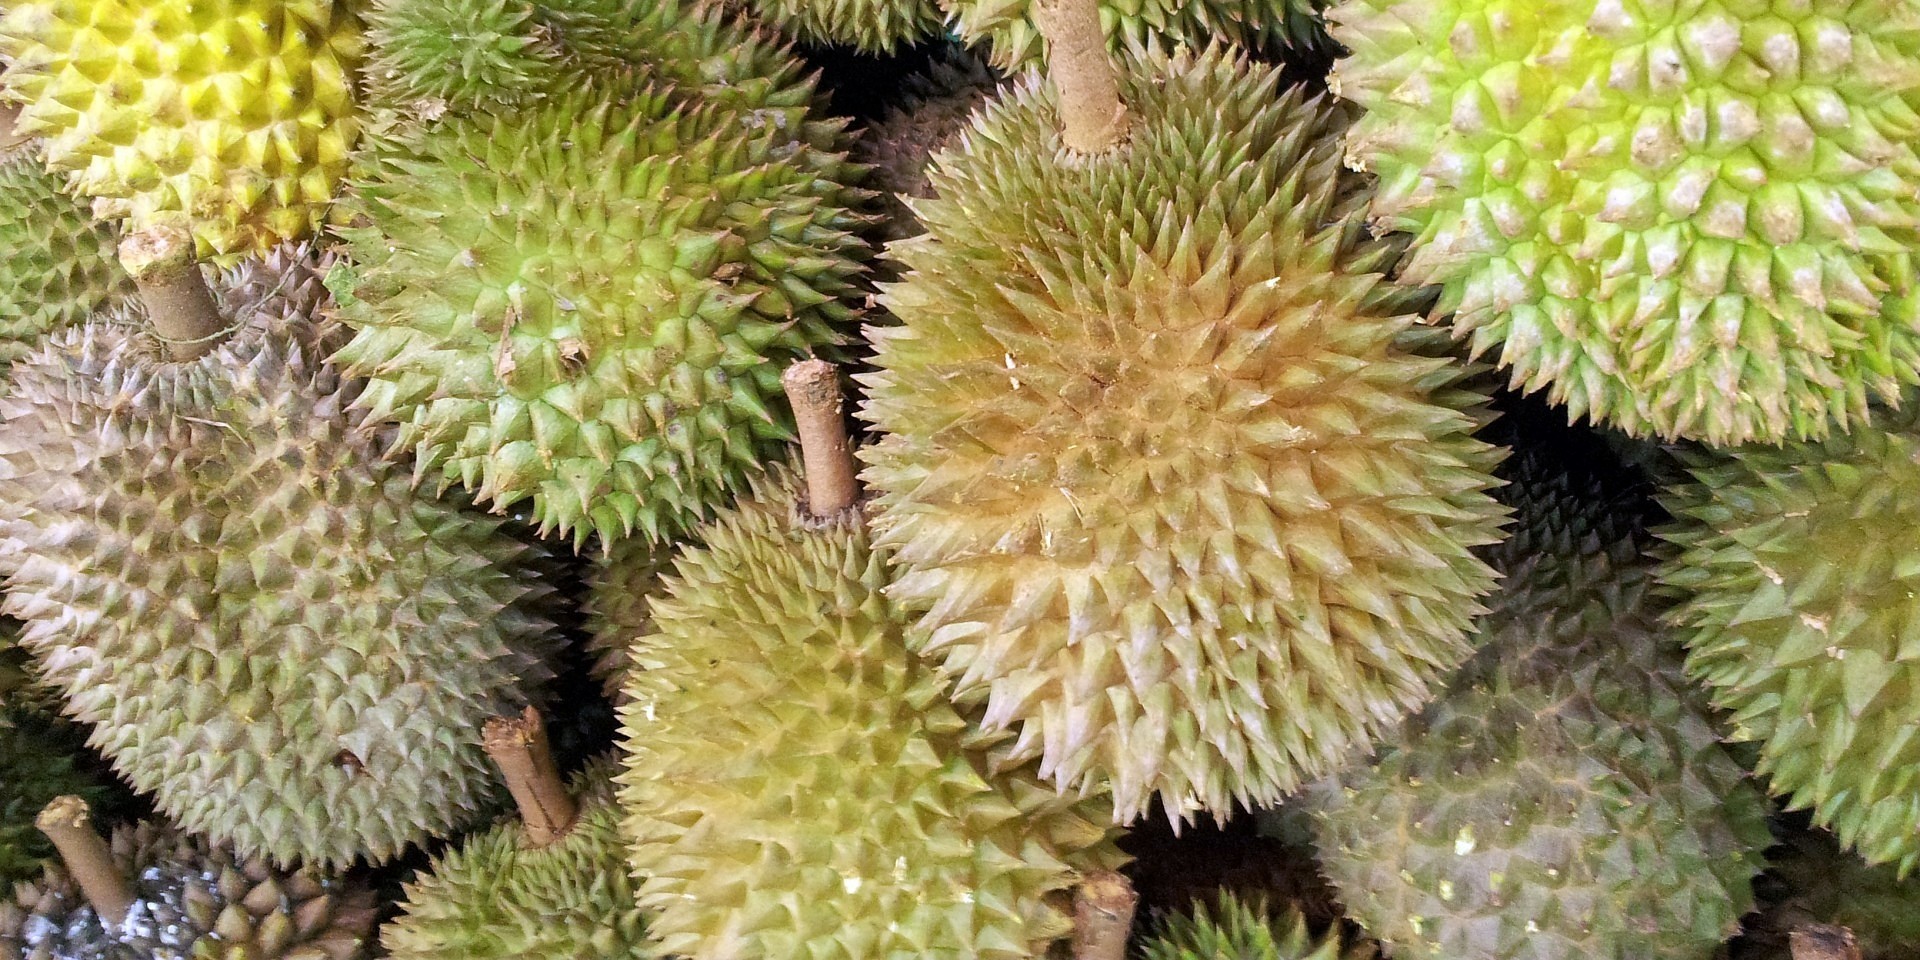 EVER WONDER WHAT’S INSIDE “THE BIG DURIAN”?